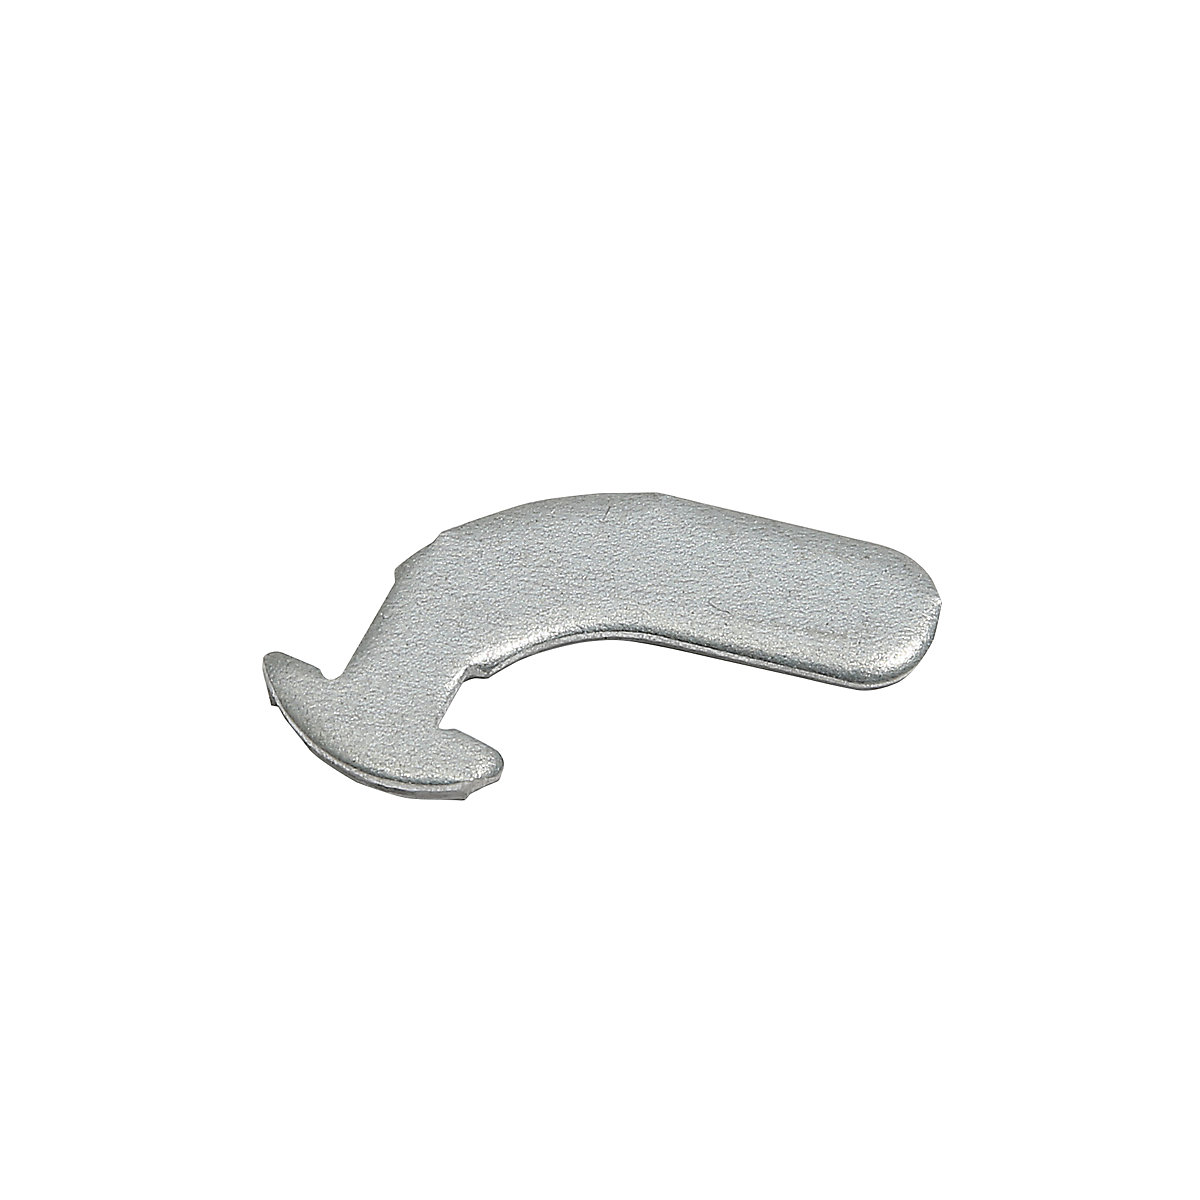 Replacement safety pin - SCHULTE